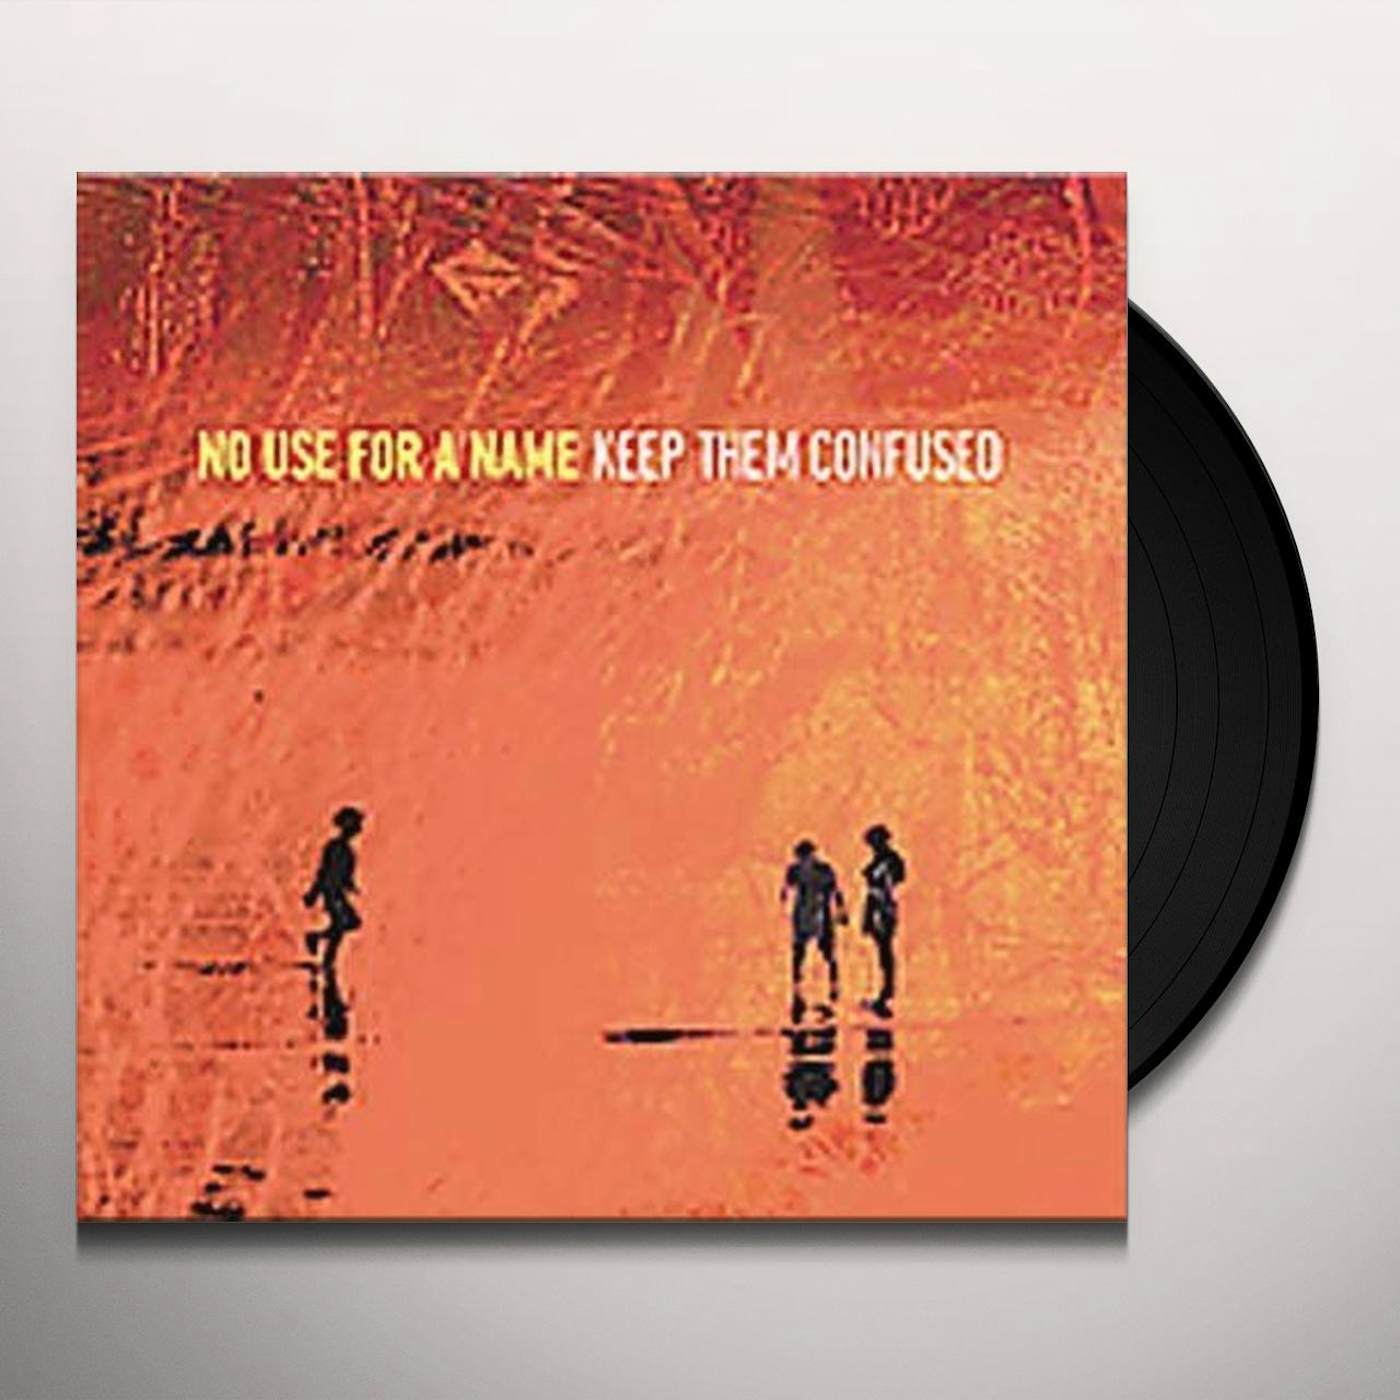 No Use For A Name Keep Them Confused Vinyl Record